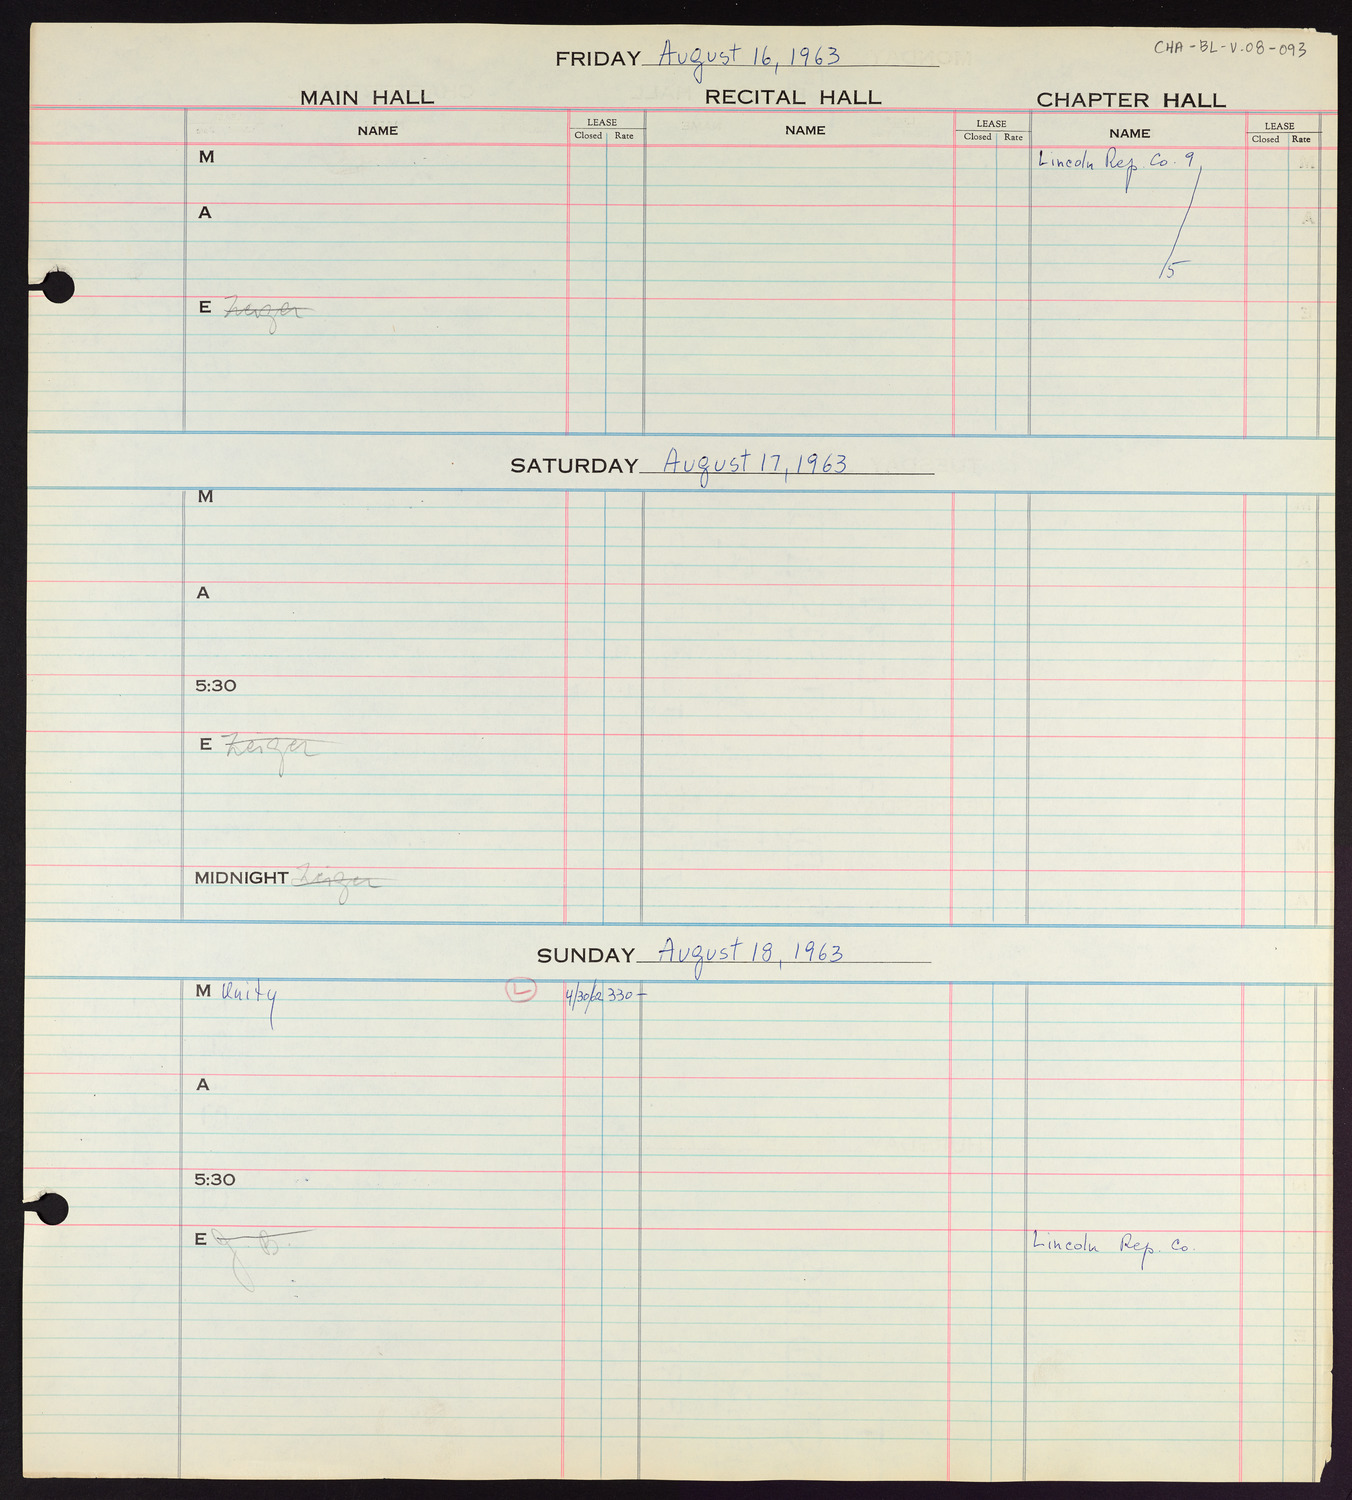 Carnegie Hall Booking Ledger, volume 8, page 93